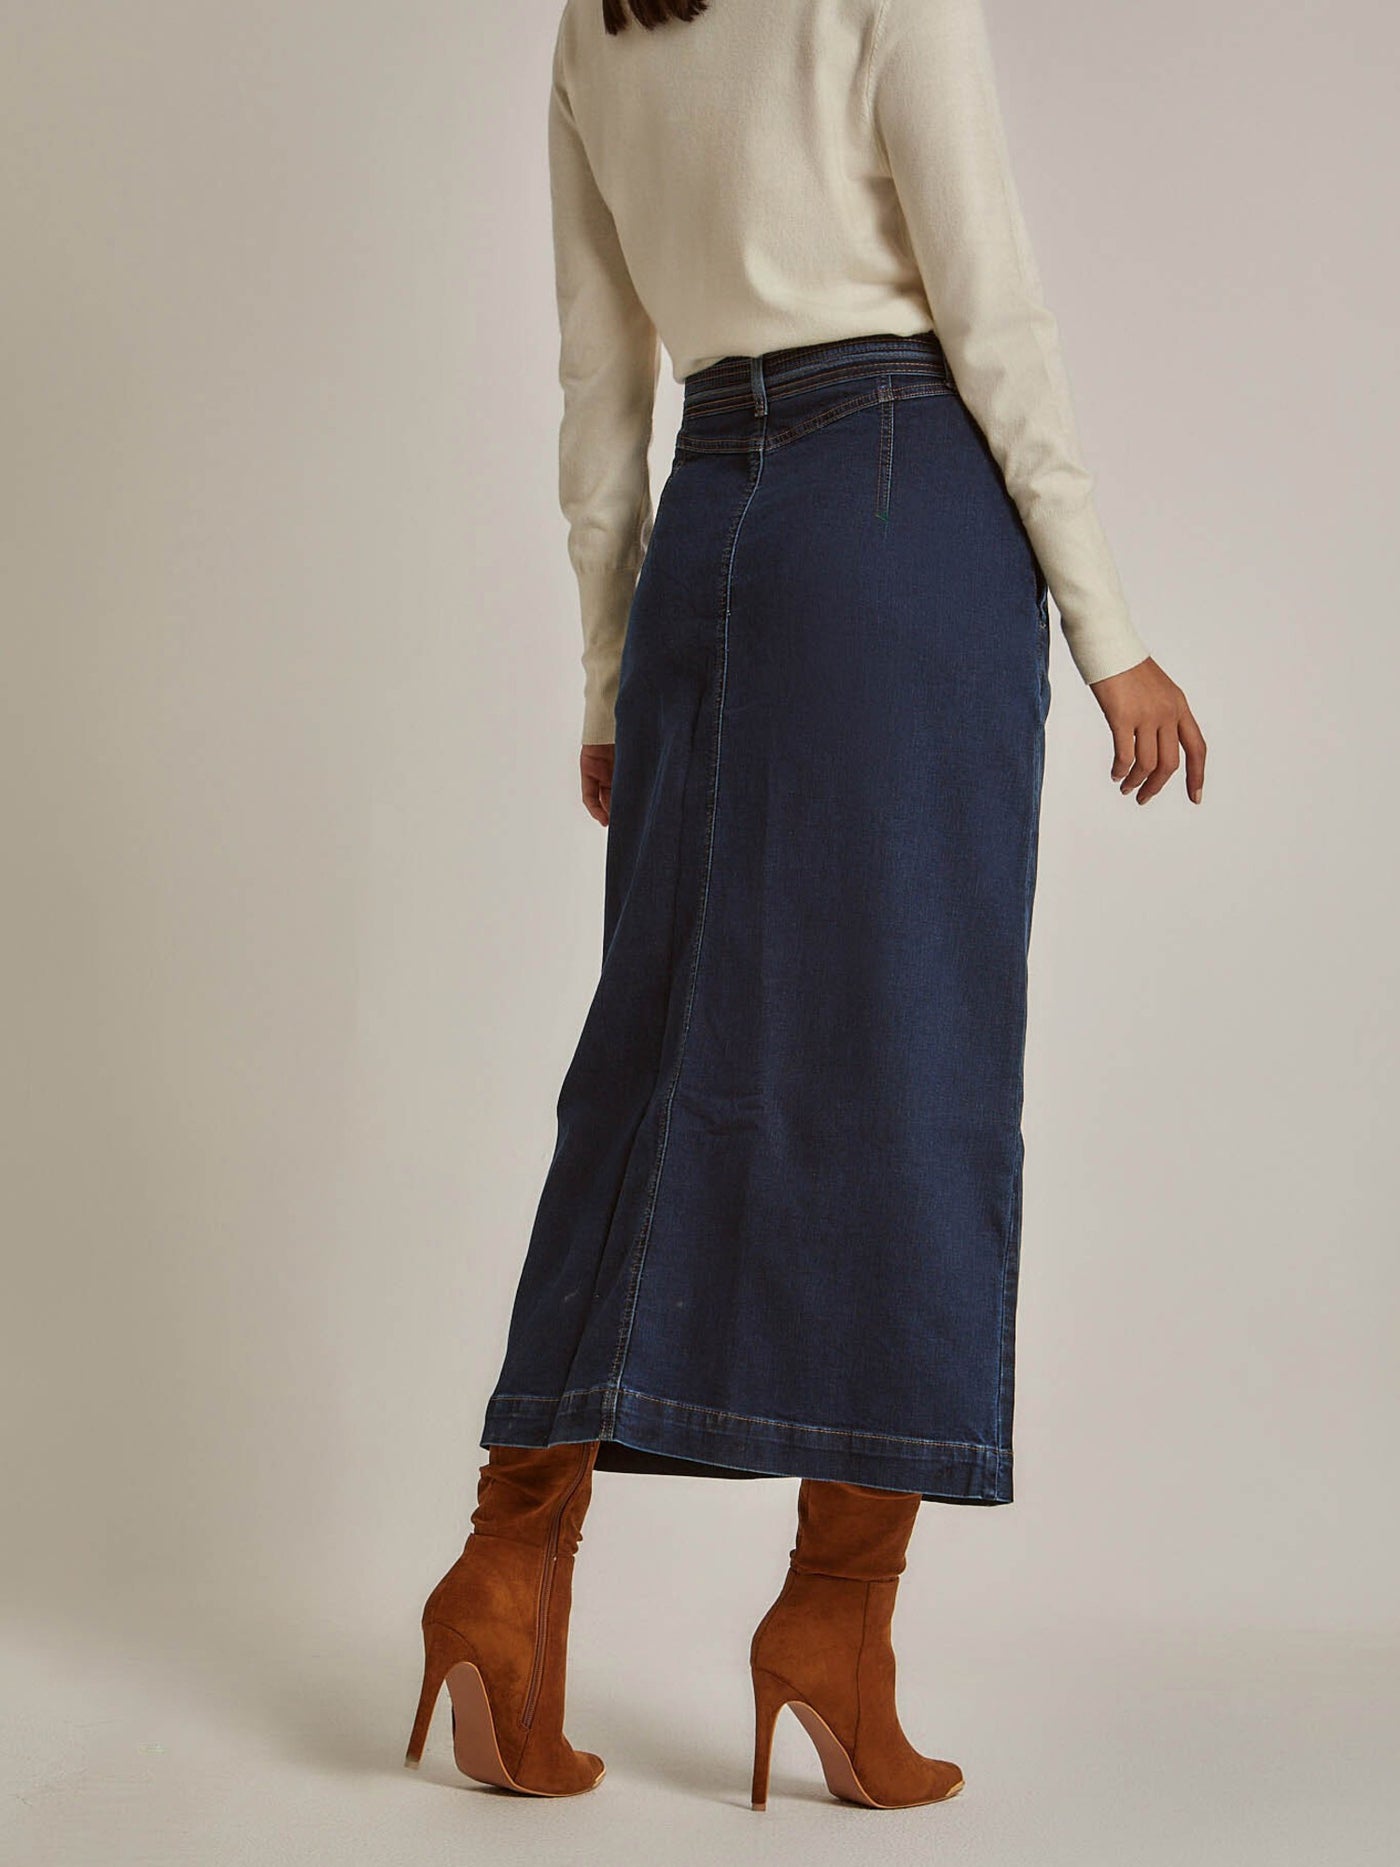 Skirt - With Lace - Side Pocket